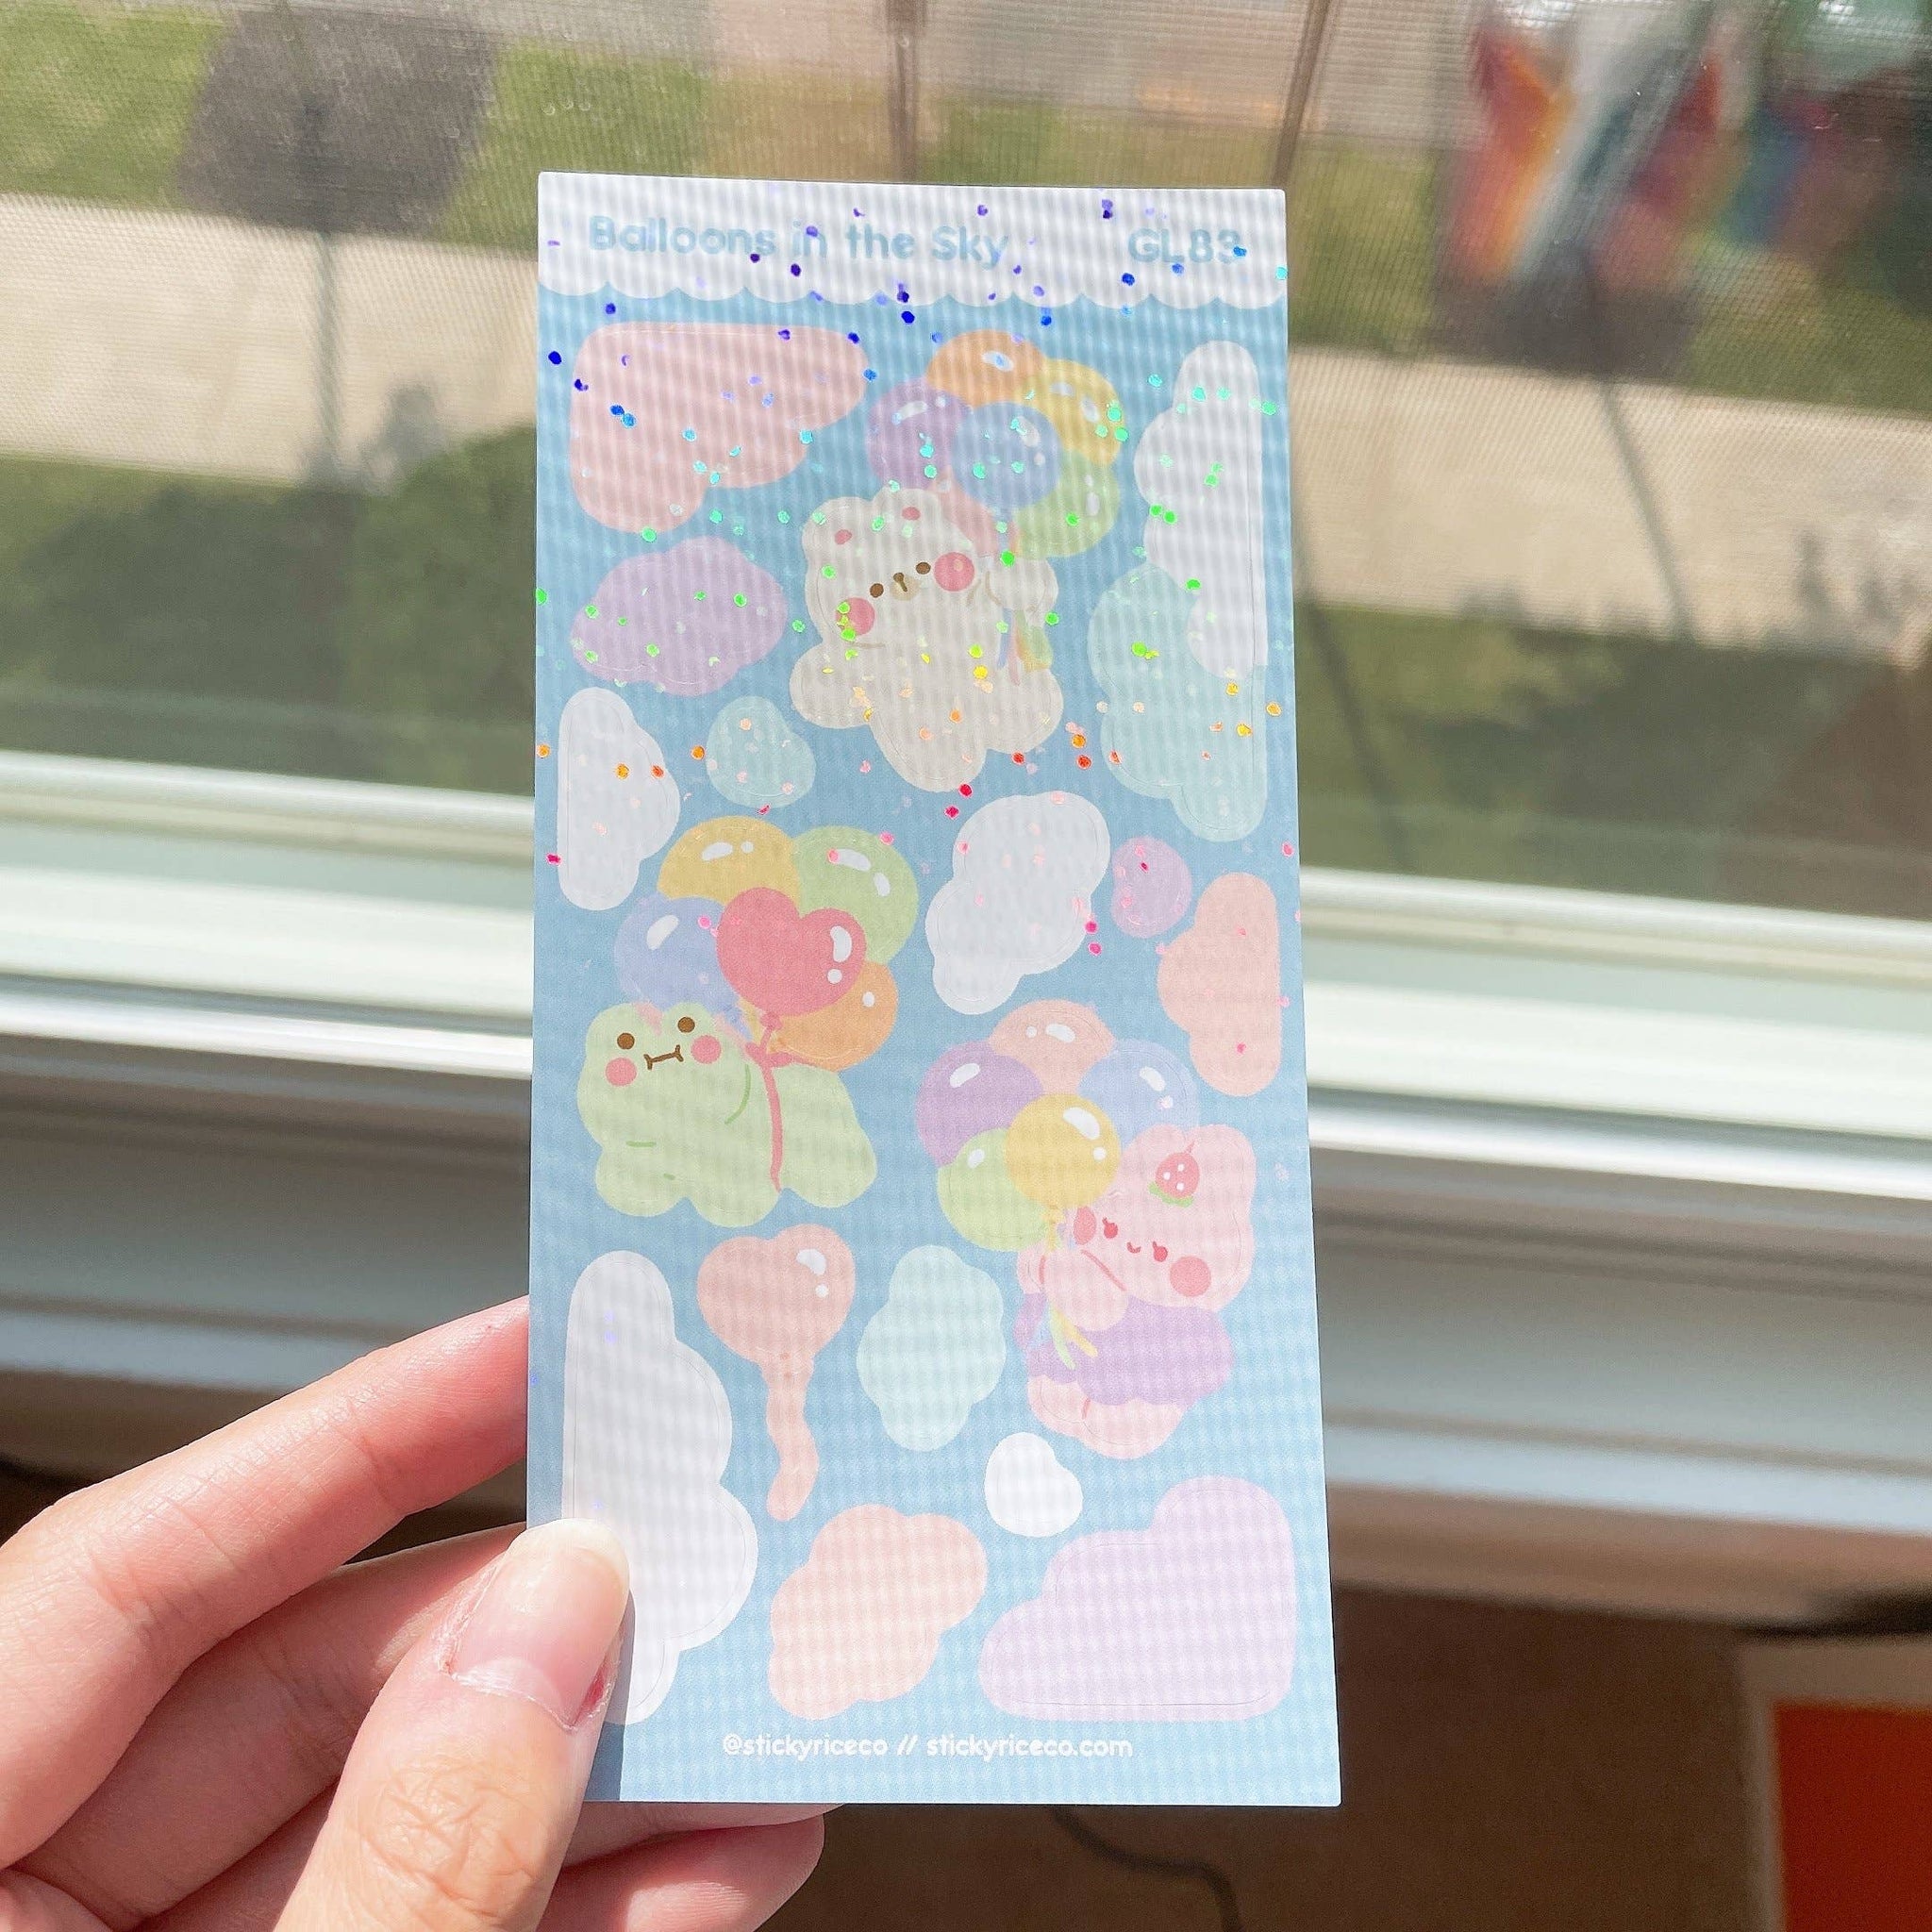 Balloons and Clouds Holographic Glitter Vinyl Stickers